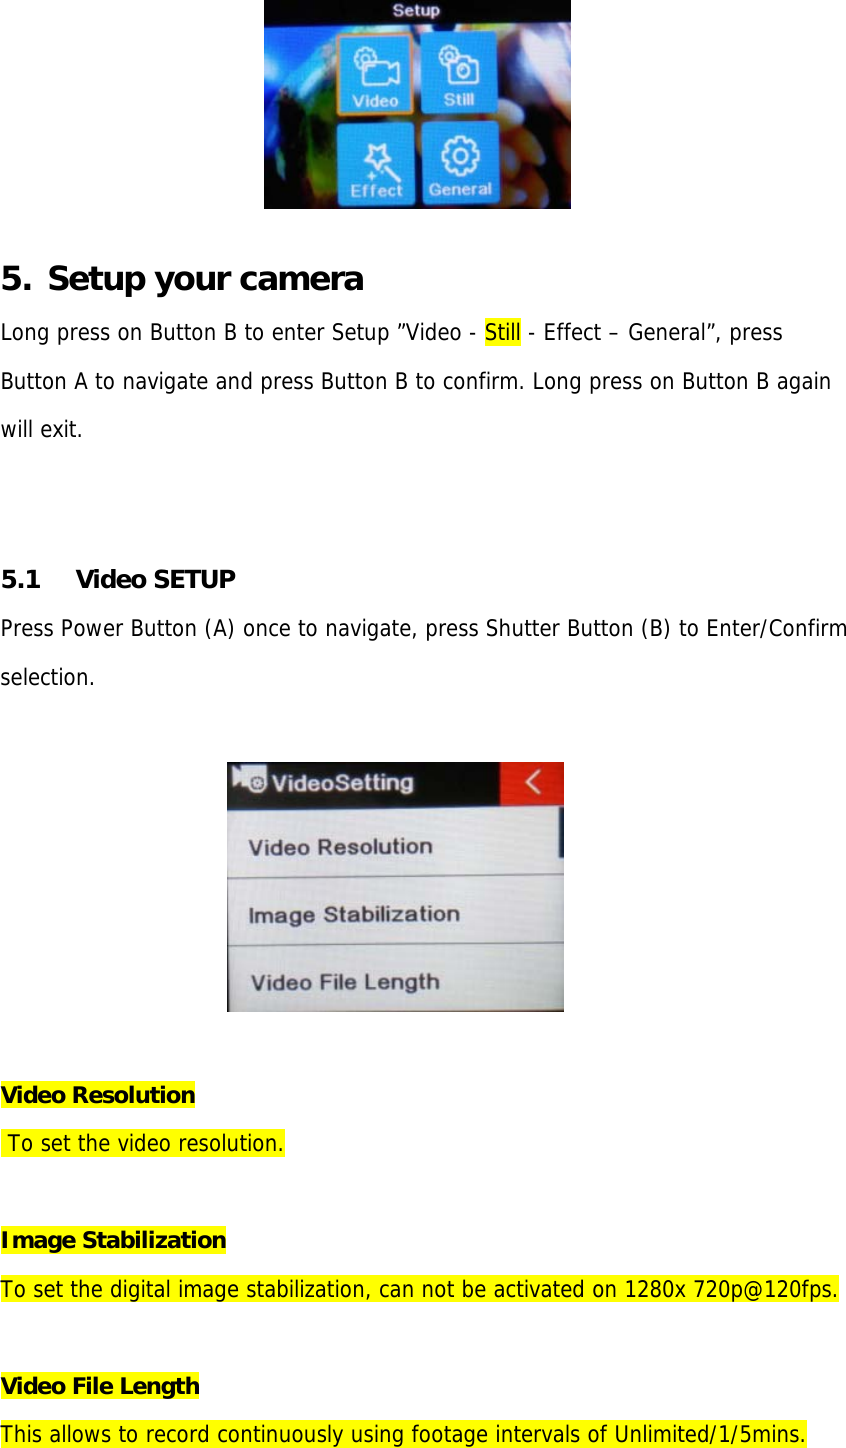   5.  Setup your camera Long press on Button B to enter Setup ”Video - Still - Effect – General”, press Button A to navigate and press Button B to confirm. Long press on Button B again  will exit.   5.1 Video SETUP Press Power Button (A) once to navigate, press Shutter Button (B) to Enter/Confirm  selection.                                    Video Resolution  To set the video resolution.  Image Stabilization To set the digital image stabilization, can not be activated on 1280x 720p@120fps.  Video File Length This allows to record continuously using footage intervals of Unlimited/1/5mins.  